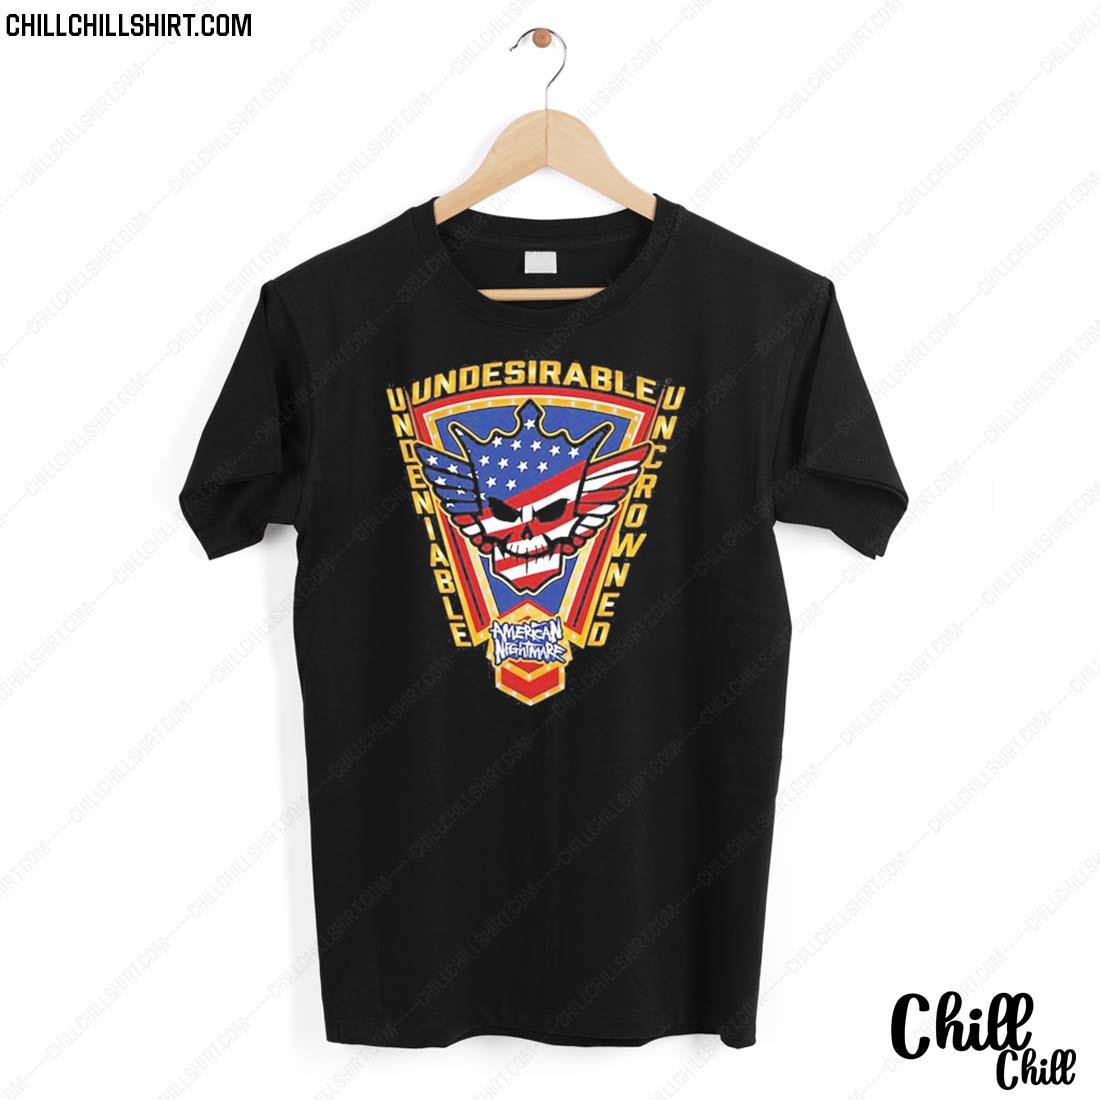 Nice cody Rhodes Undeniable Uncrowned T-shirt